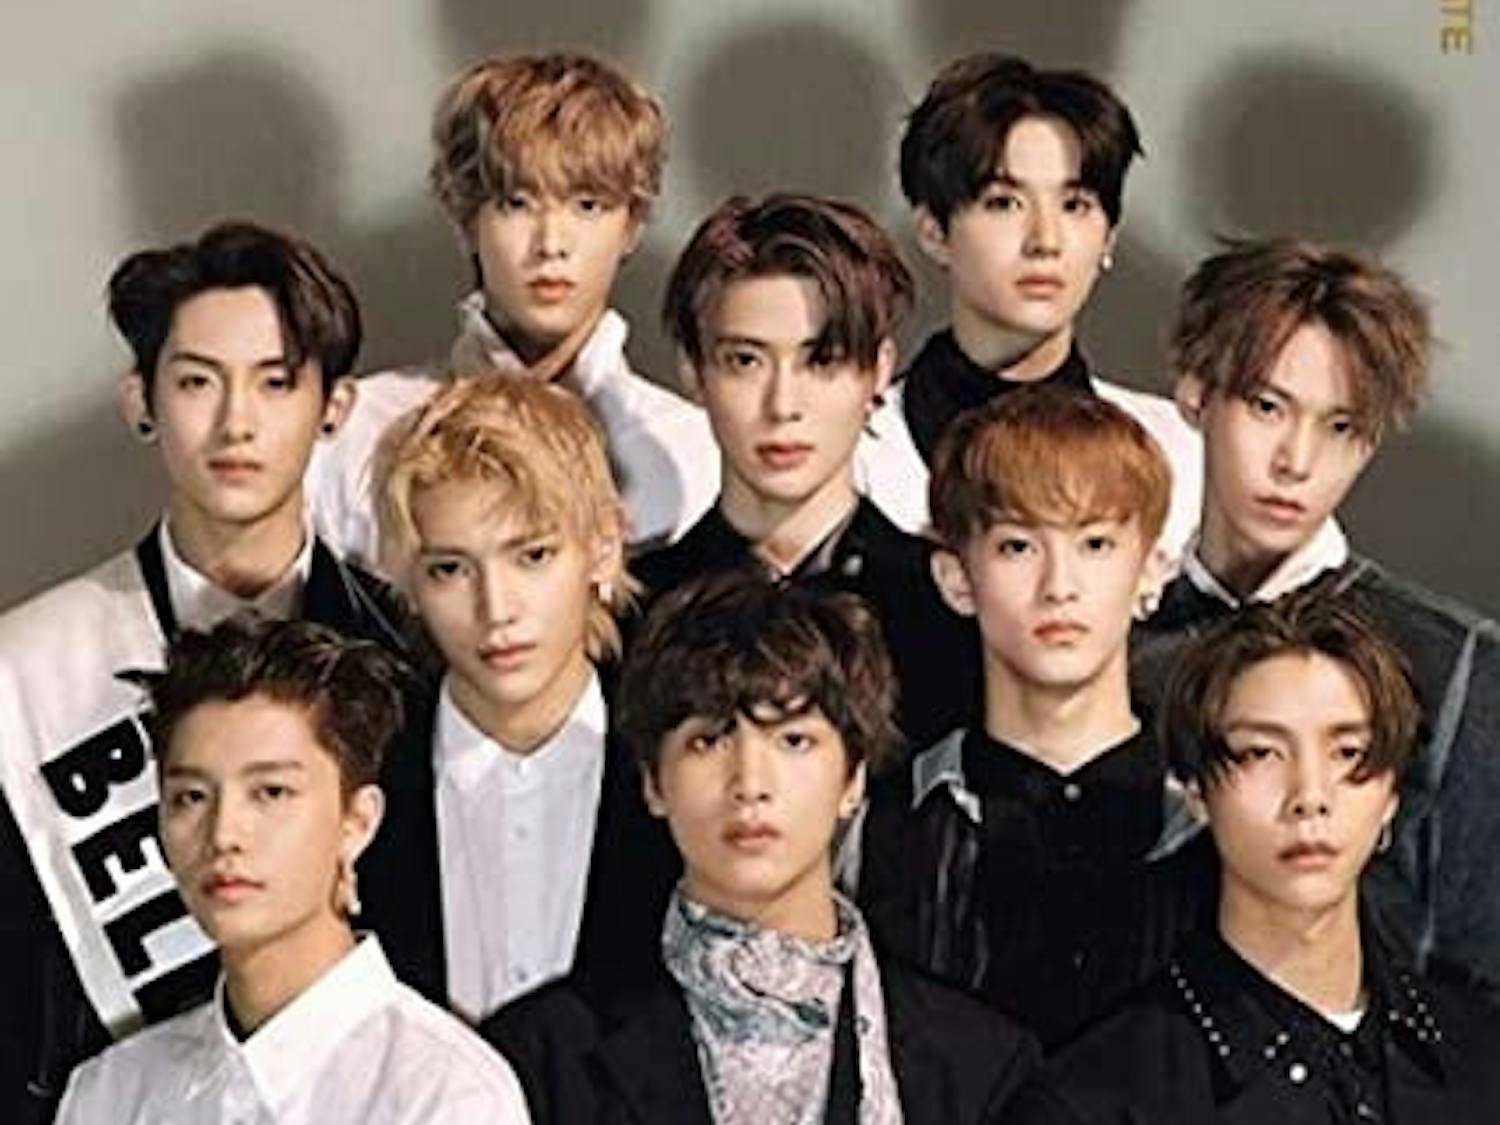 nct